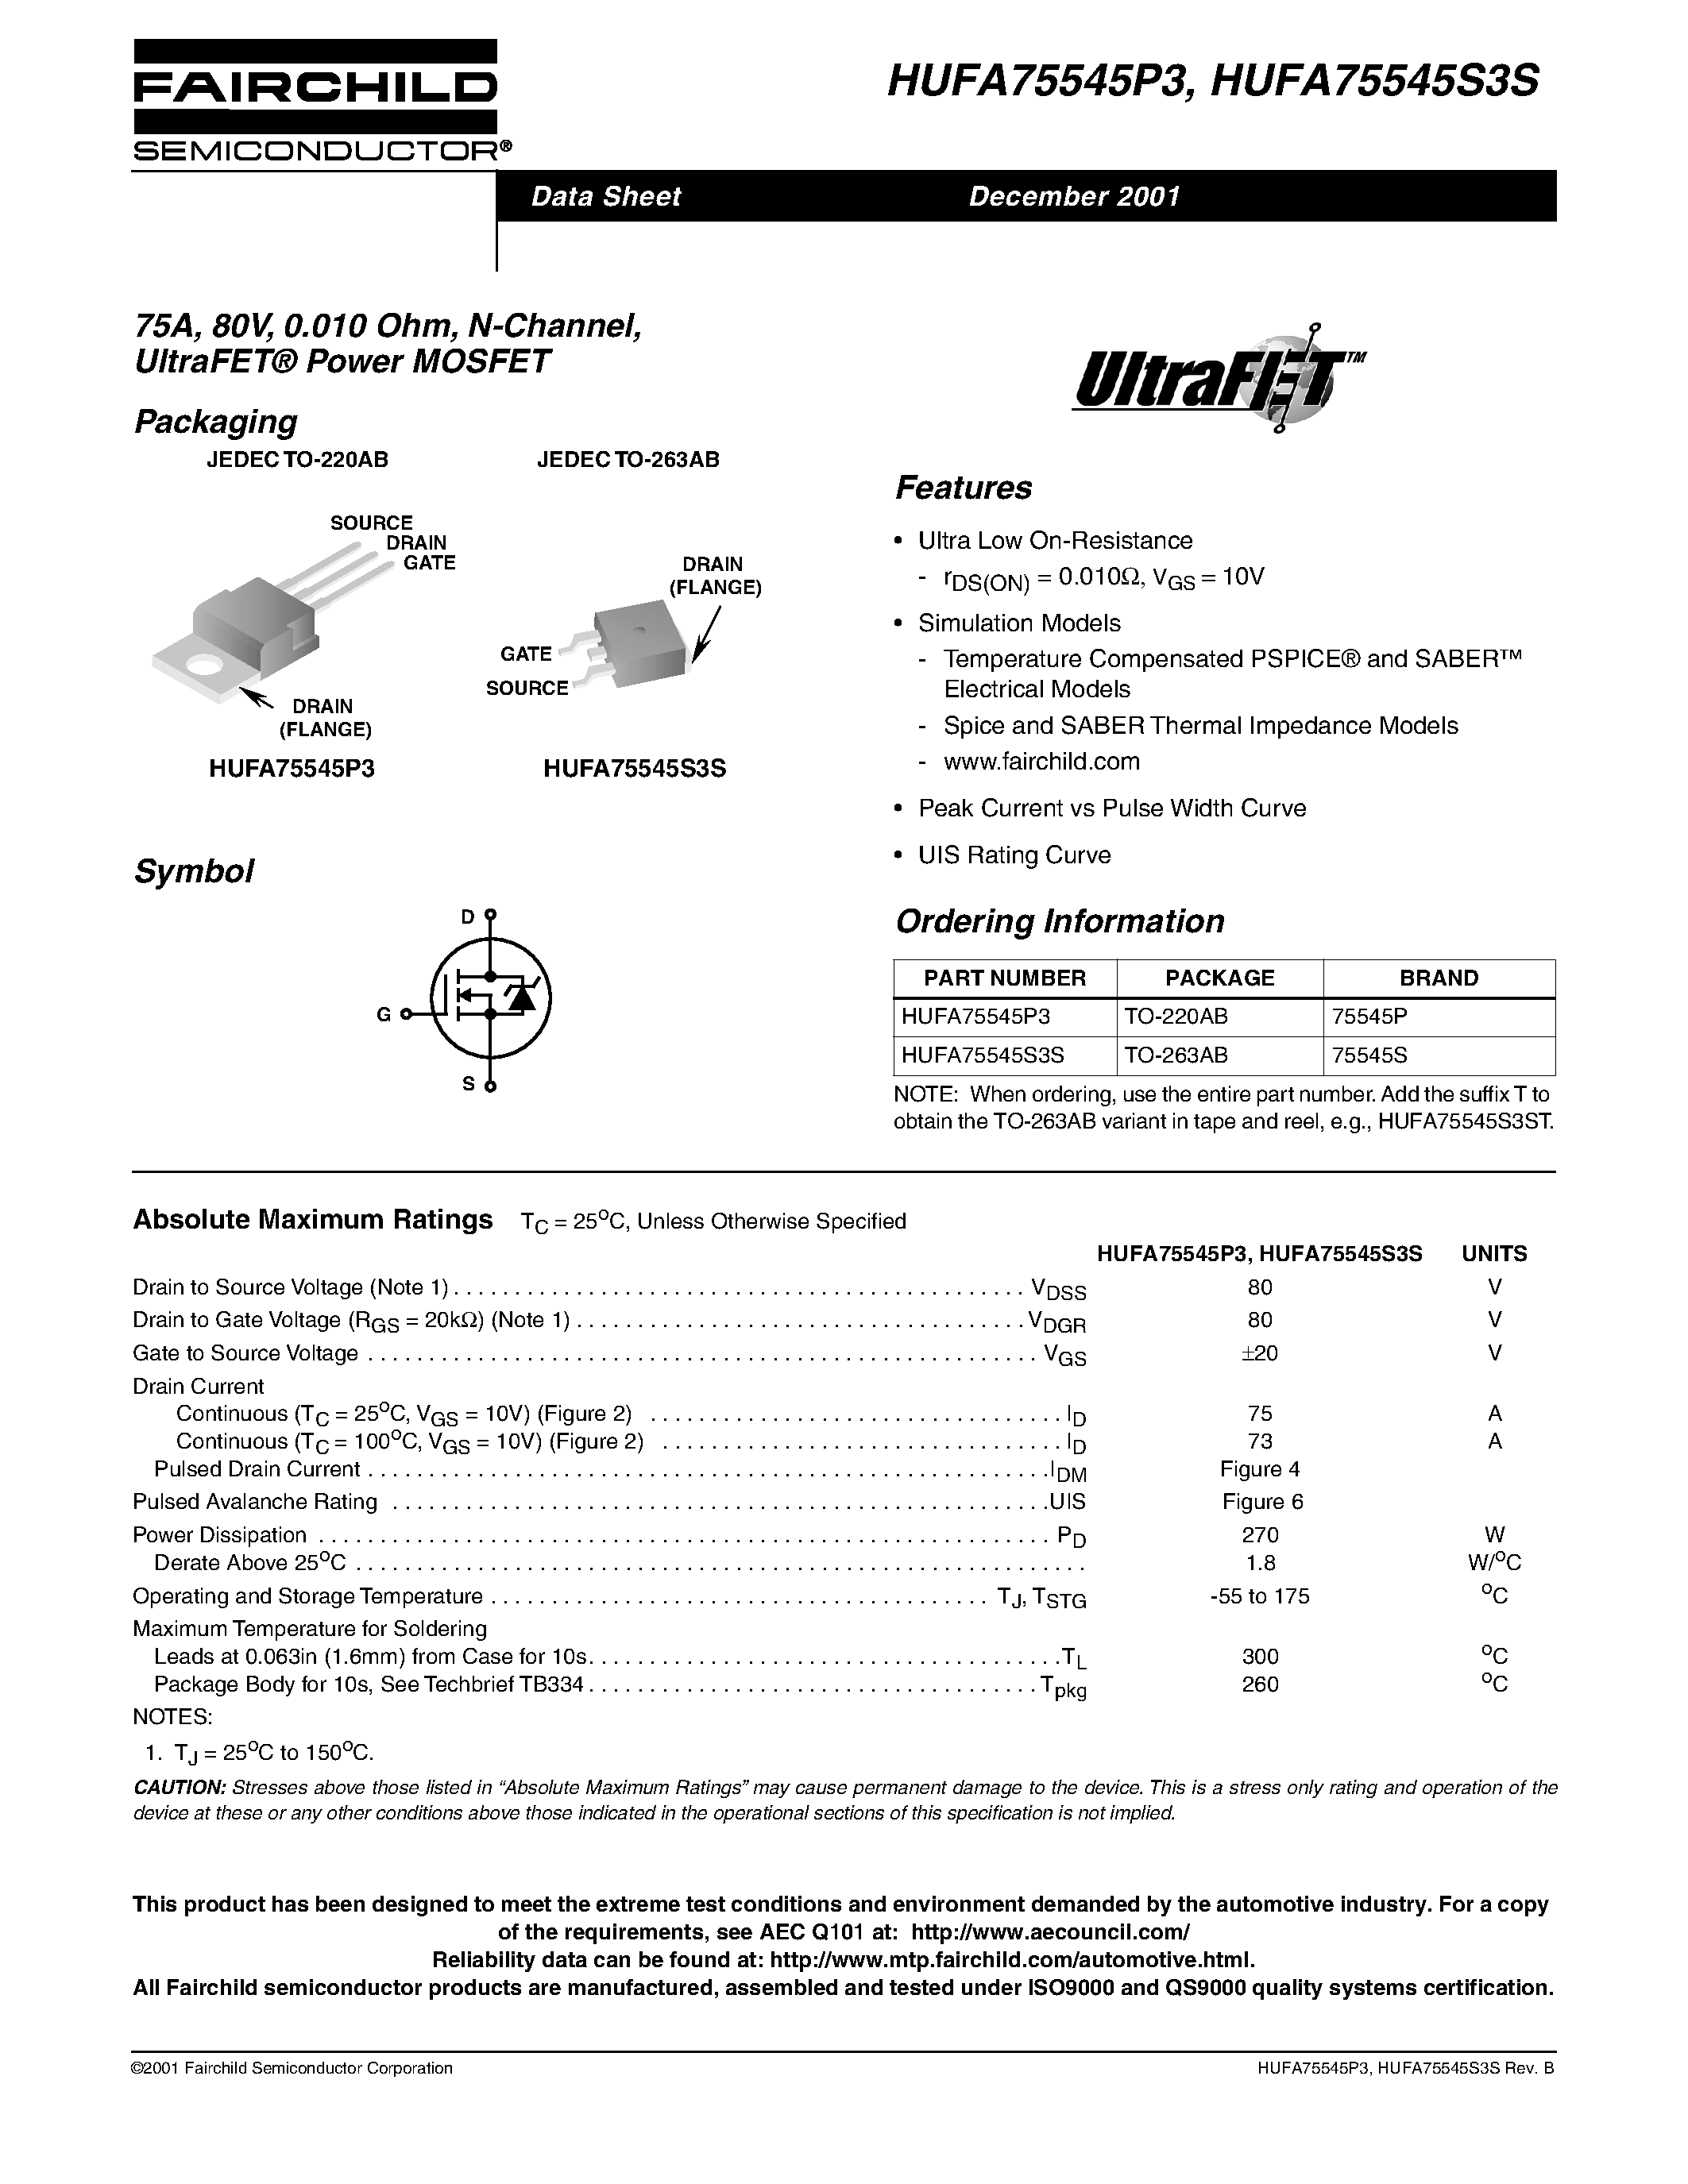 Datasheet HUFA75545P3 - 75A/ 80V/ 0.010 Ohm/ N-Channel/ UltraFET Power MOSFET page 1